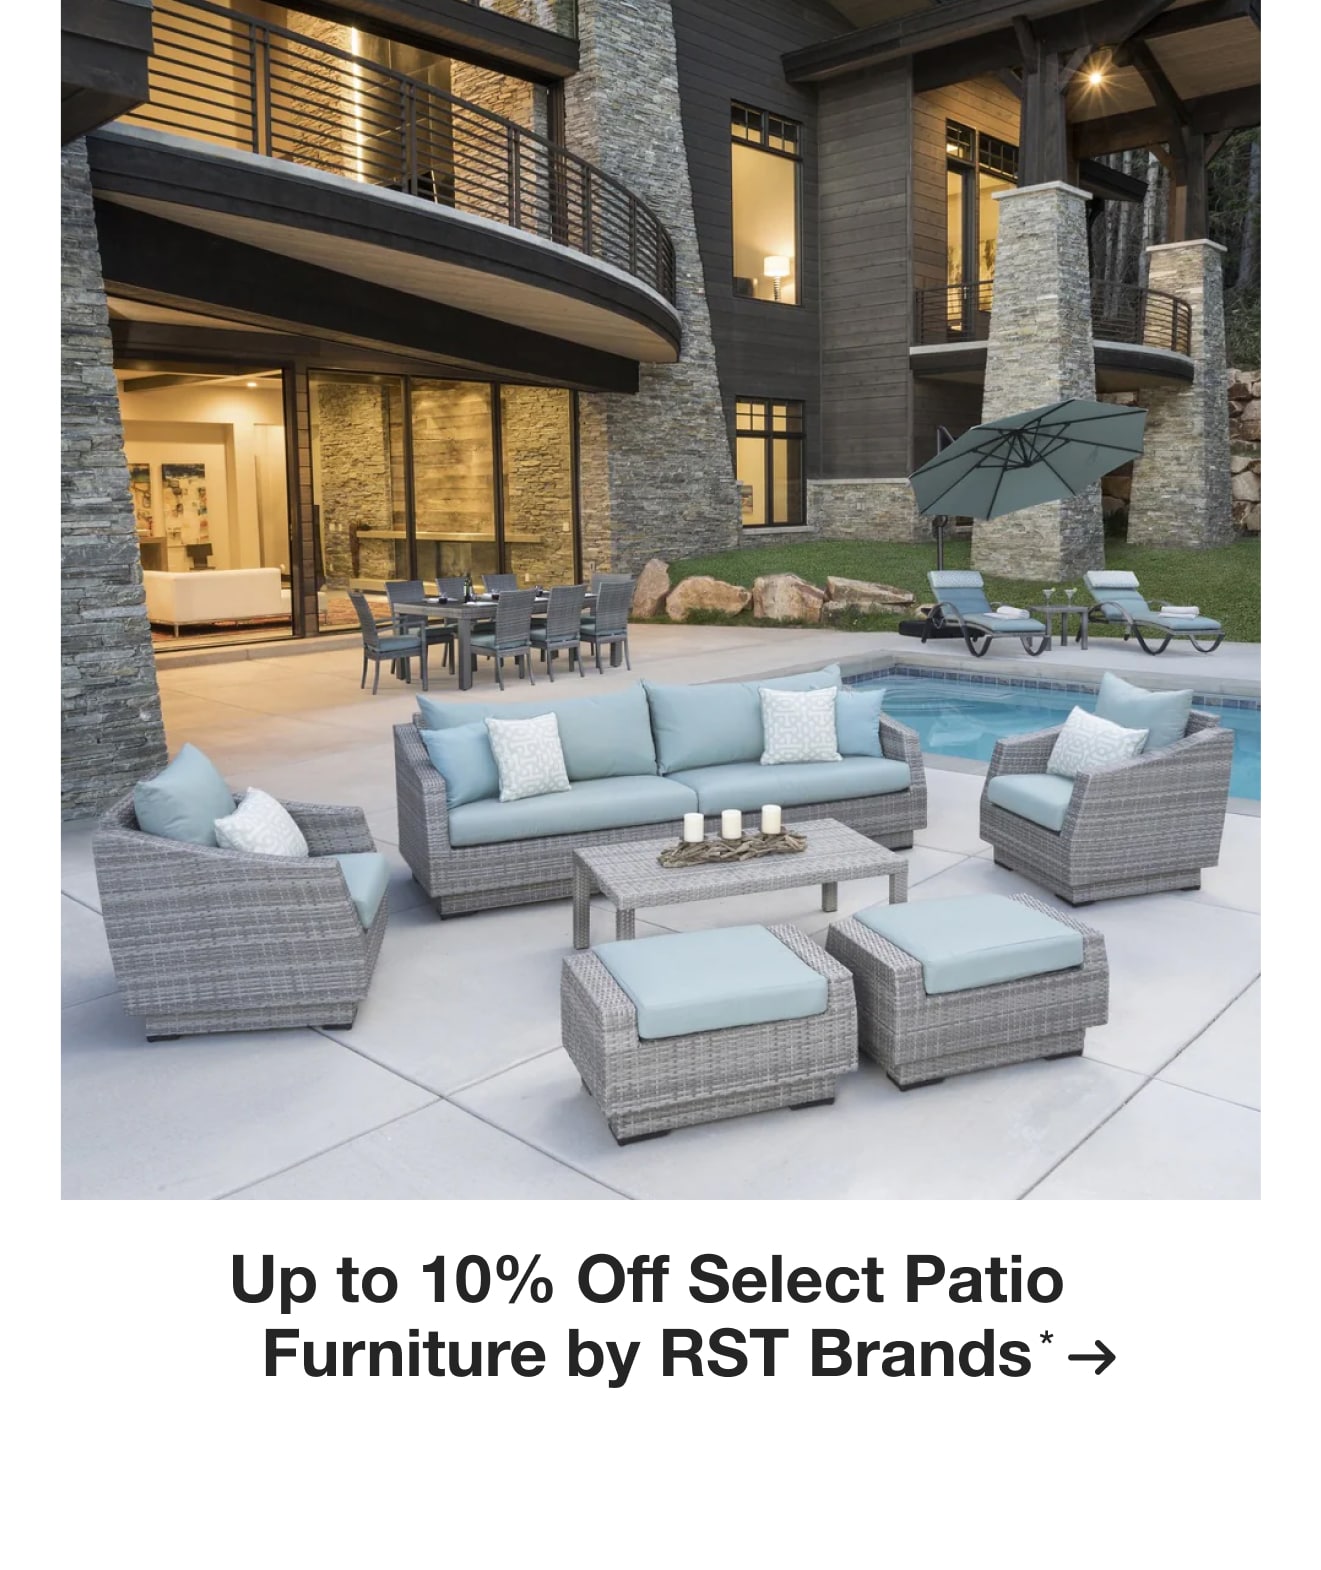 Up to 10% Off Select Patio Furniture by RST Brands*